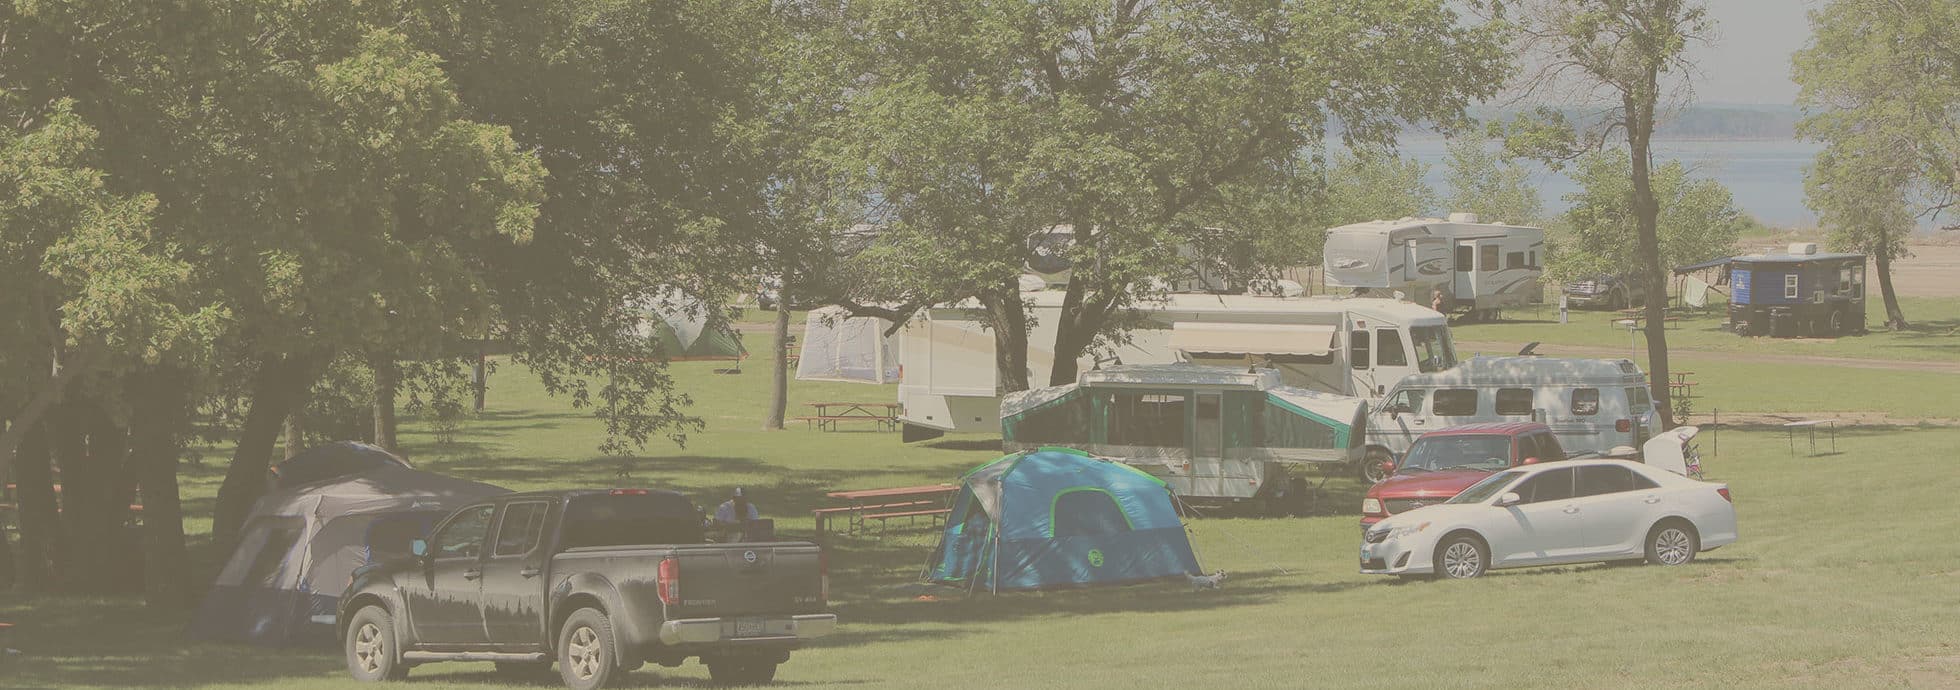 Tents, RV’s and cars parked on and around the grassy sites for tent camping at Eastbay Campground.